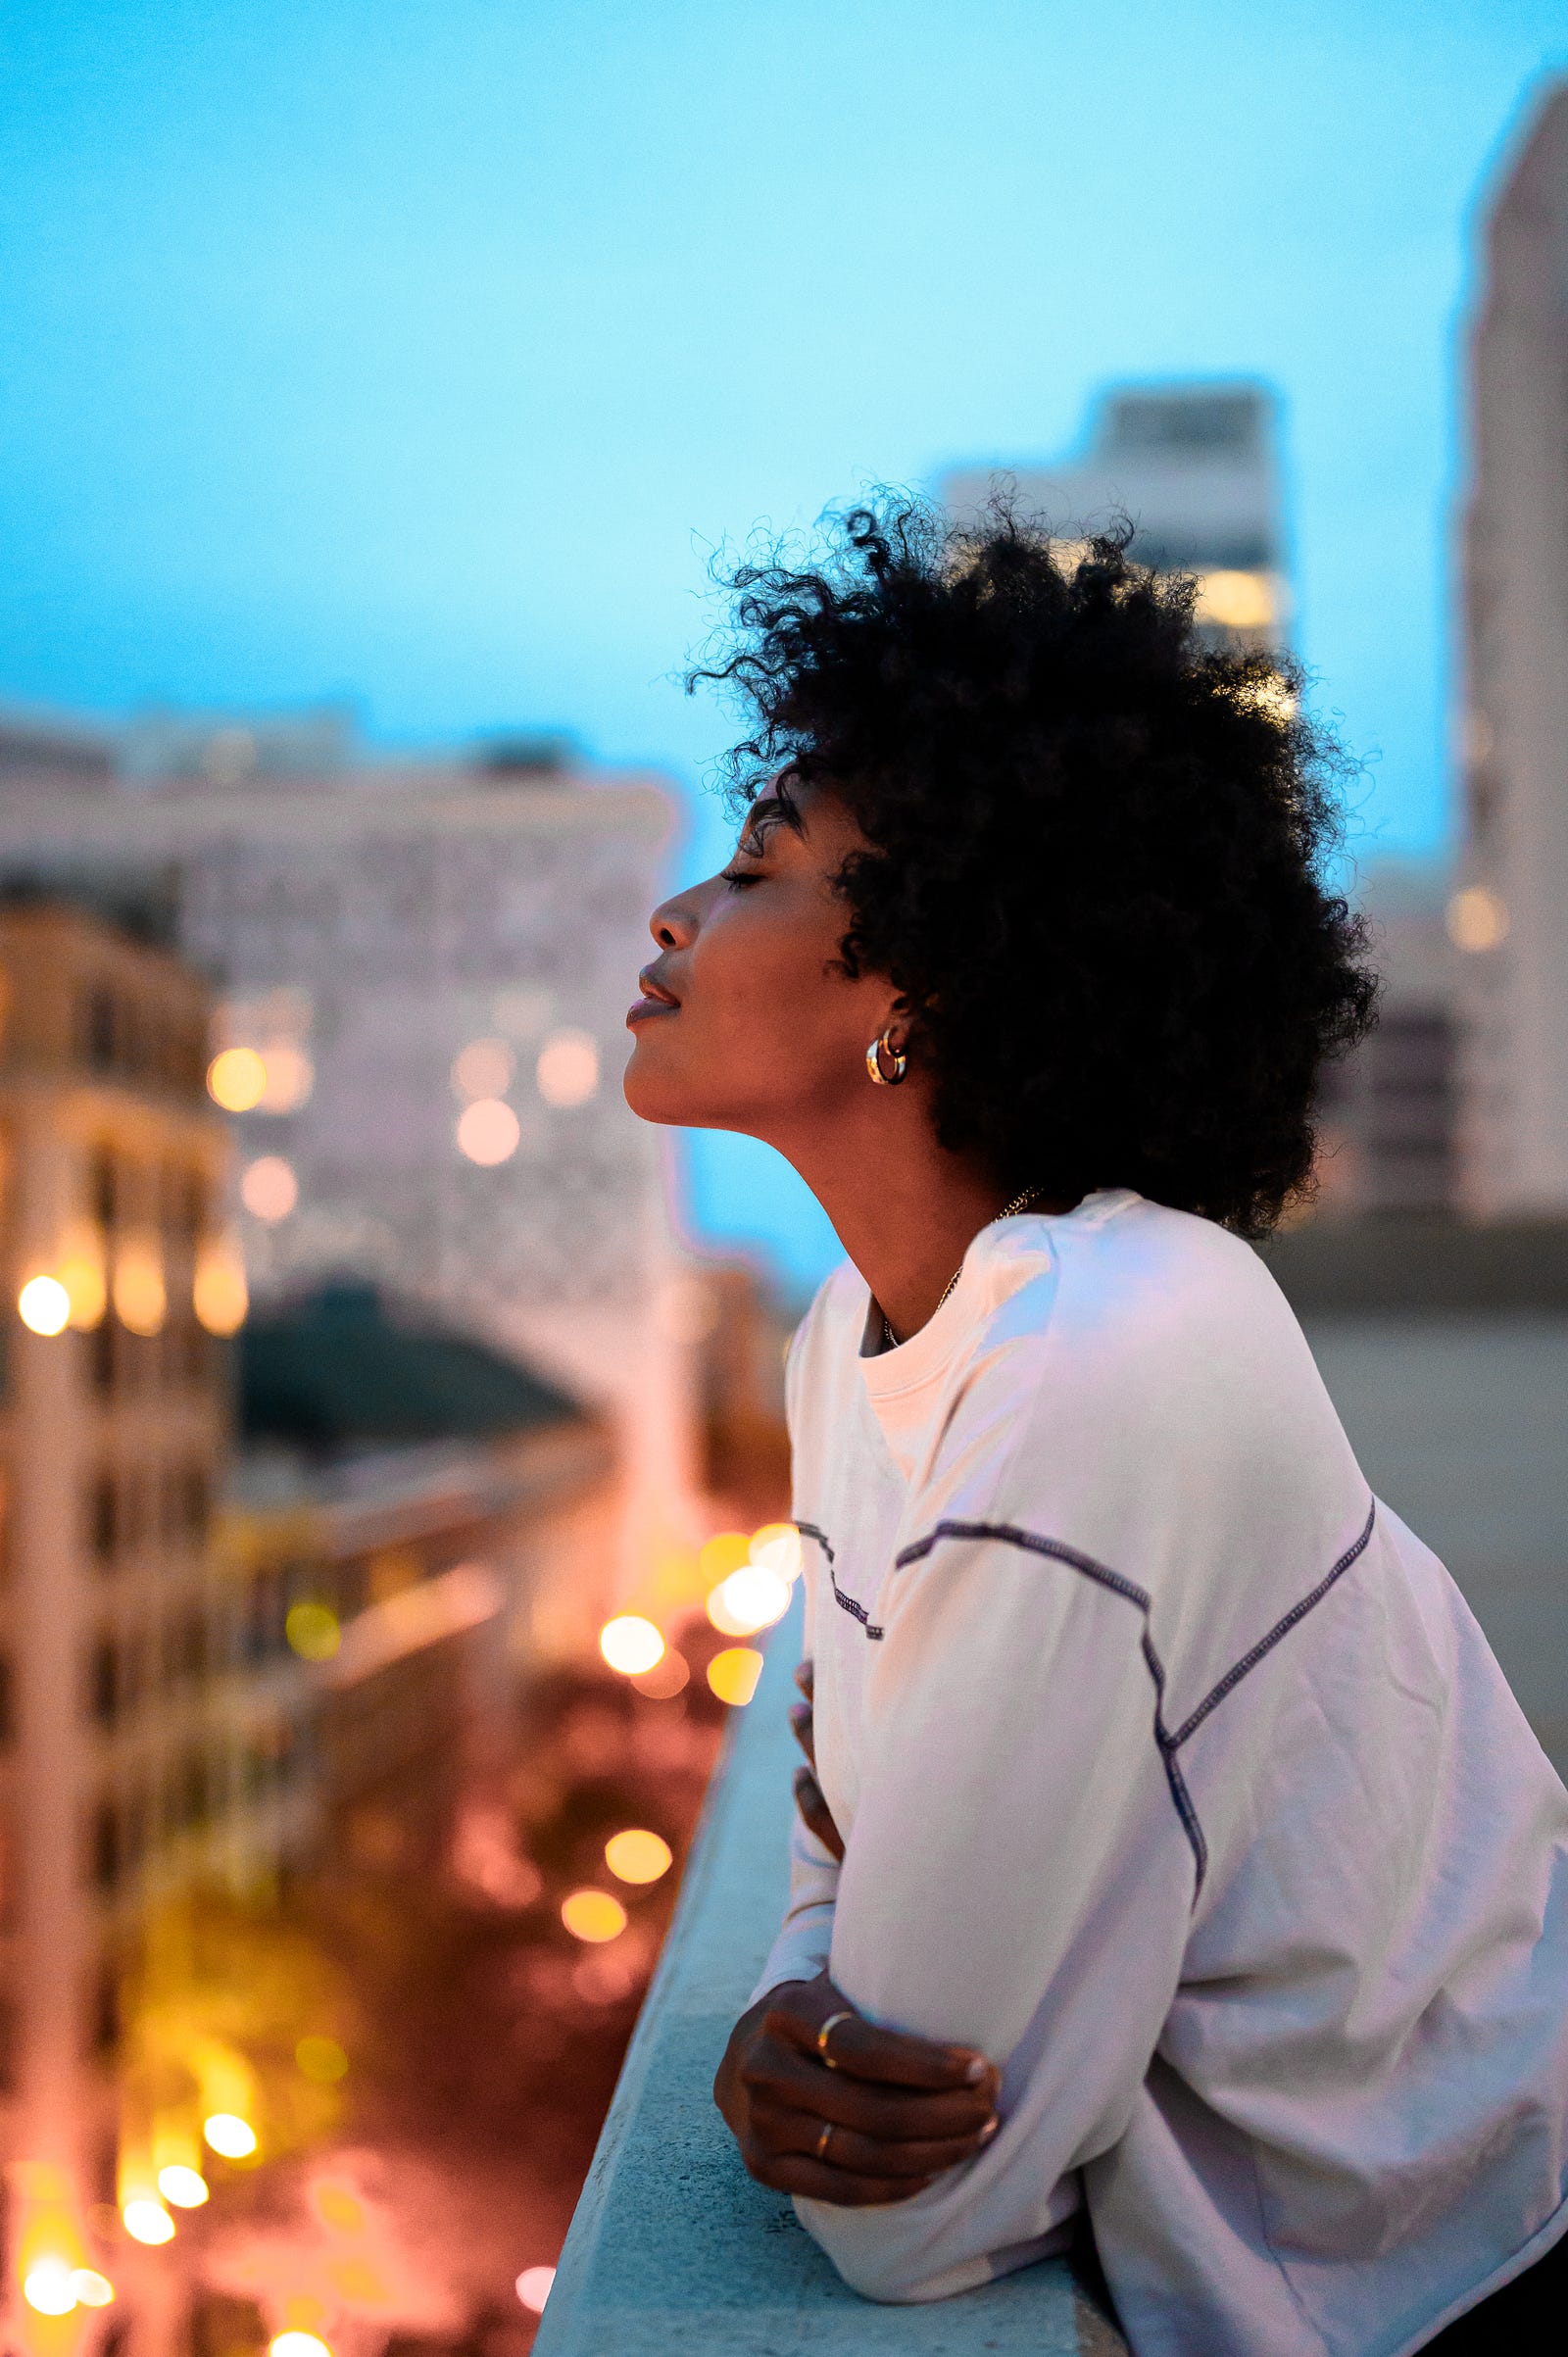 A young black female gazes to the left, the cityscape blurred behind her. Even having one unfavorable social determinant of health doubles an individual’s chances of early death.